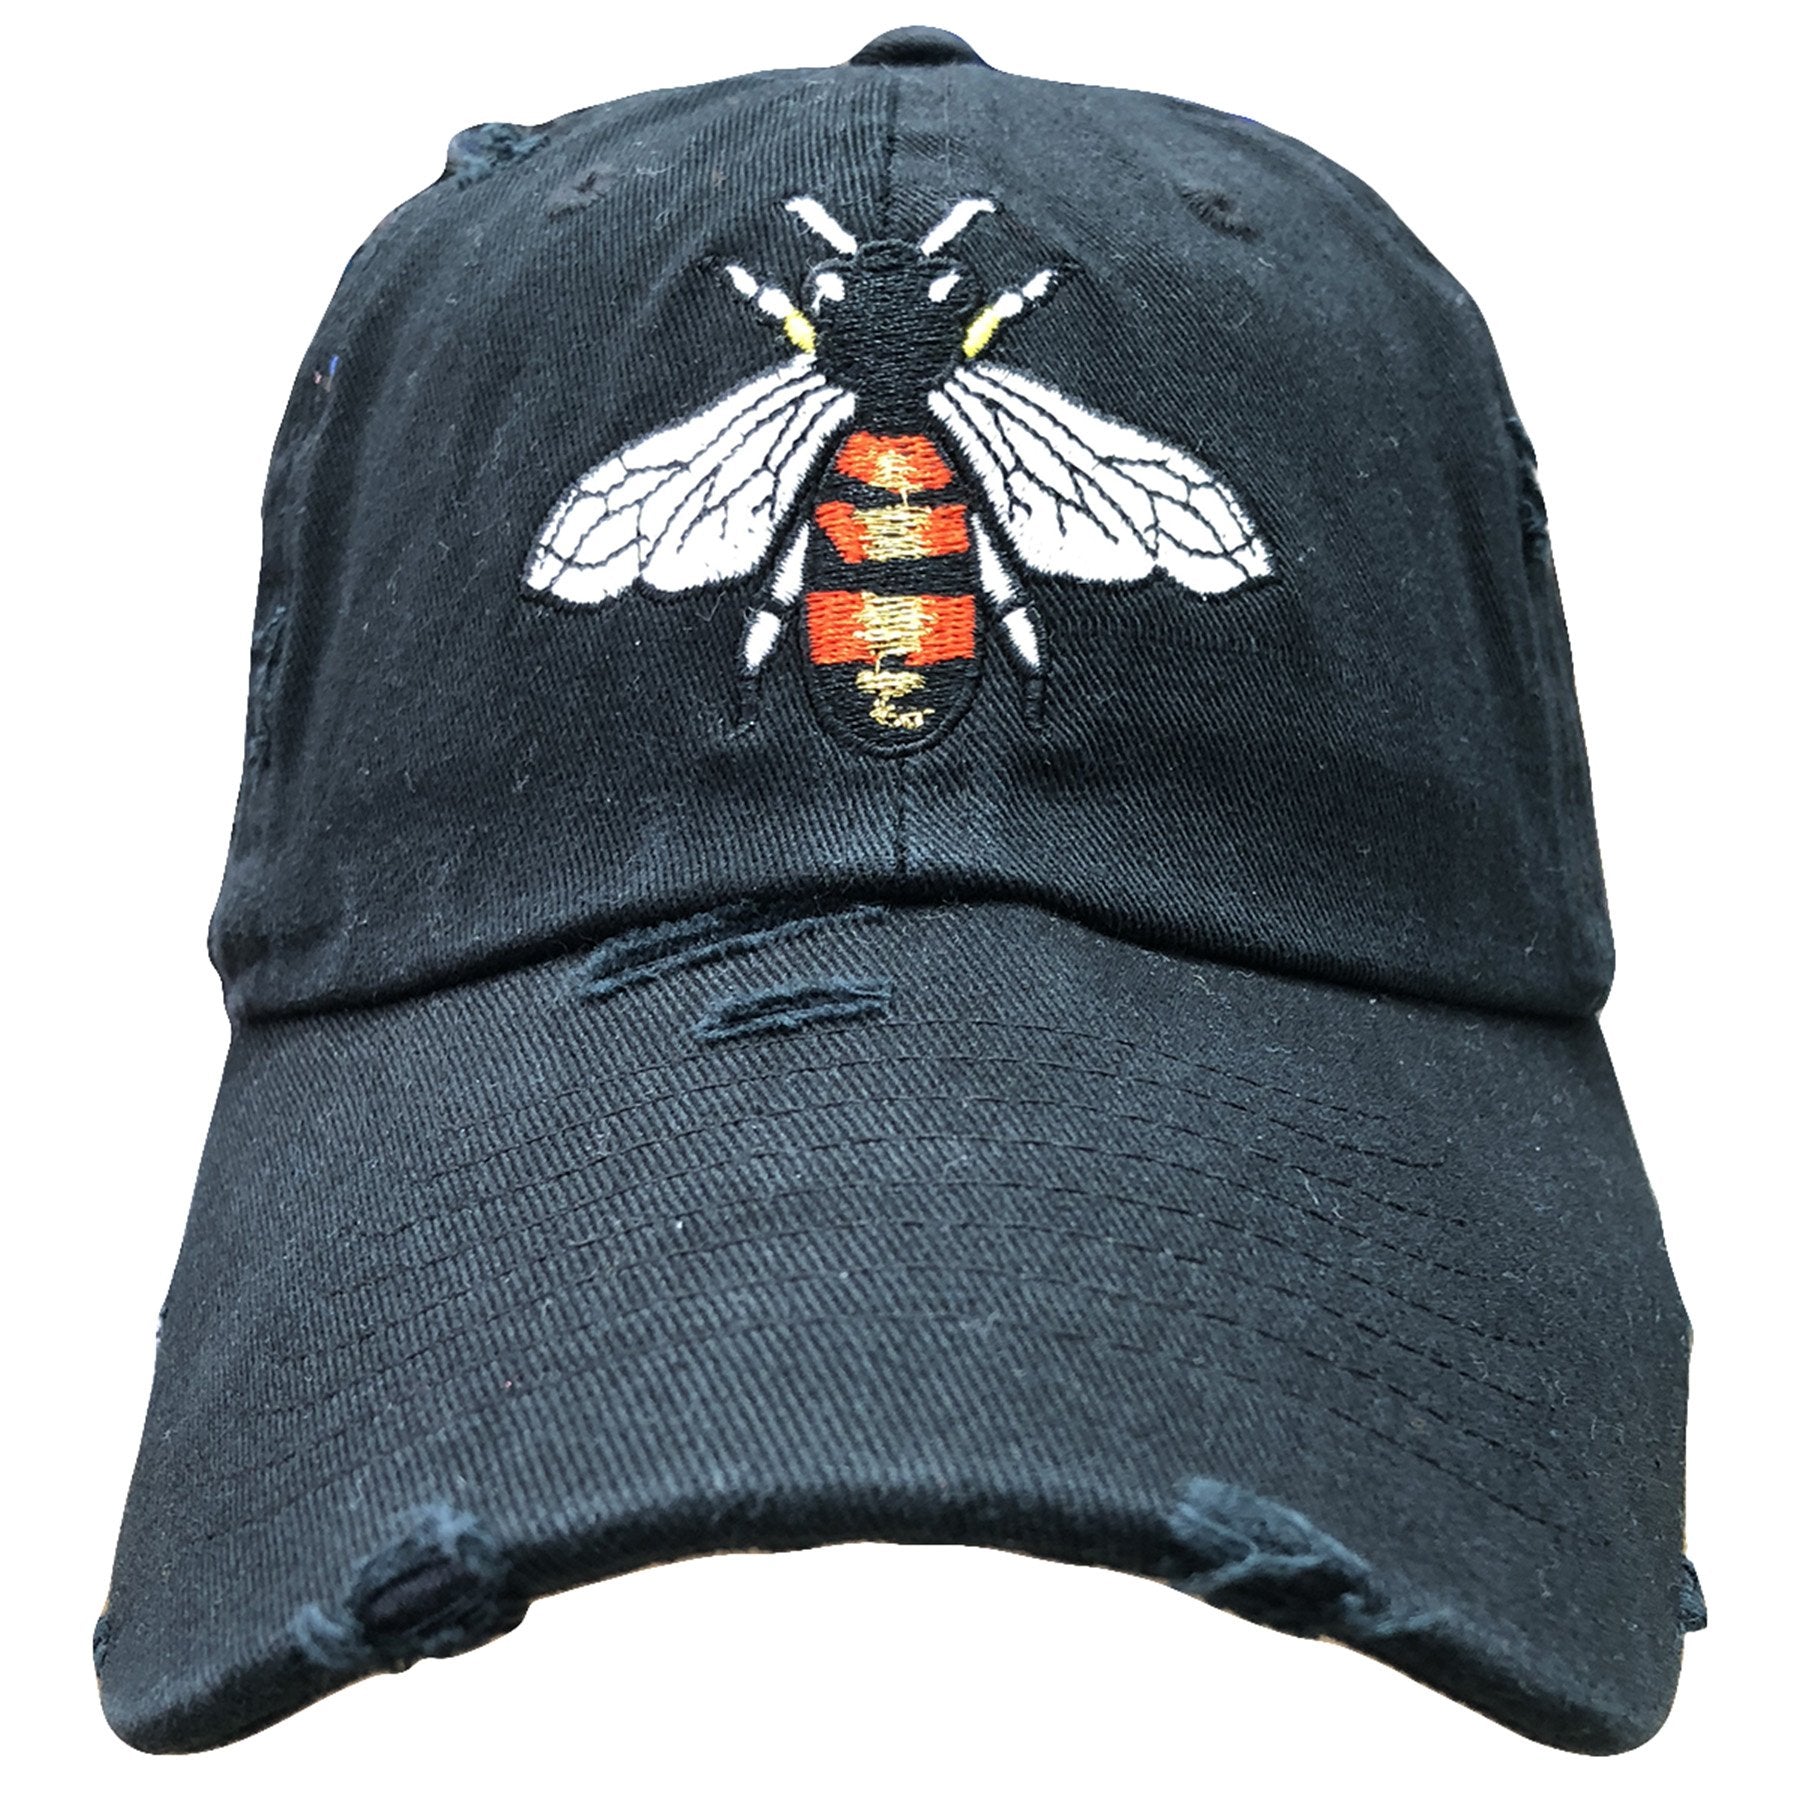 Embroidered on the front of the honey bee foot clan distressed dad hat is the honey bee logo embroidered in red, yellow, black and white